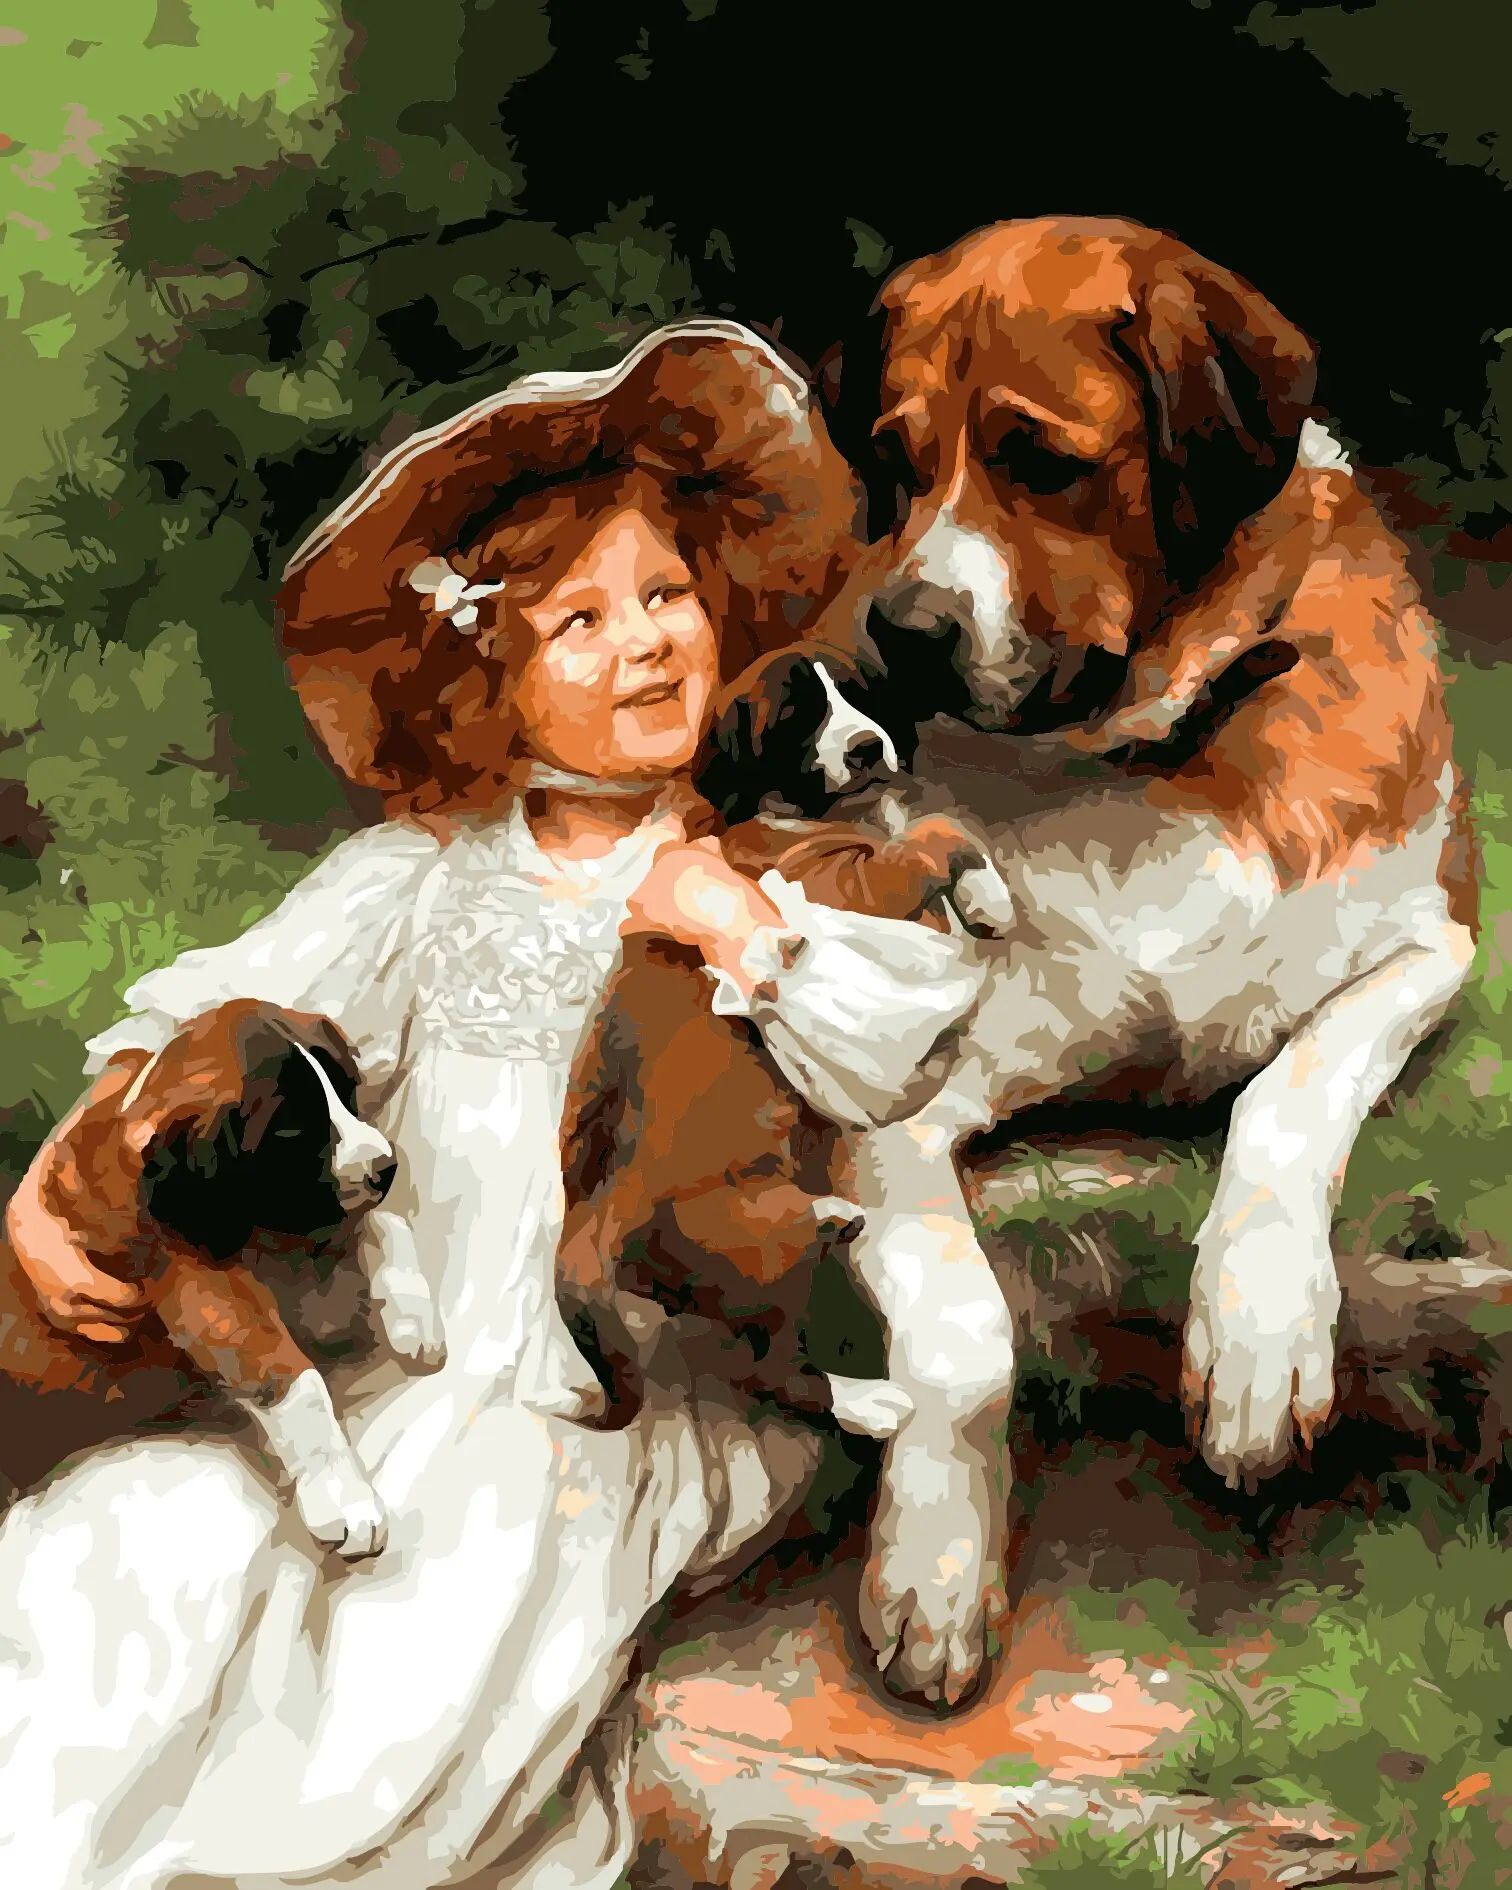 Image By Numbers No Frame Drawing Kits Paint On Canvas Unique For Home Wall Art Picture DIY Oil Painting Little girl holding a puppy